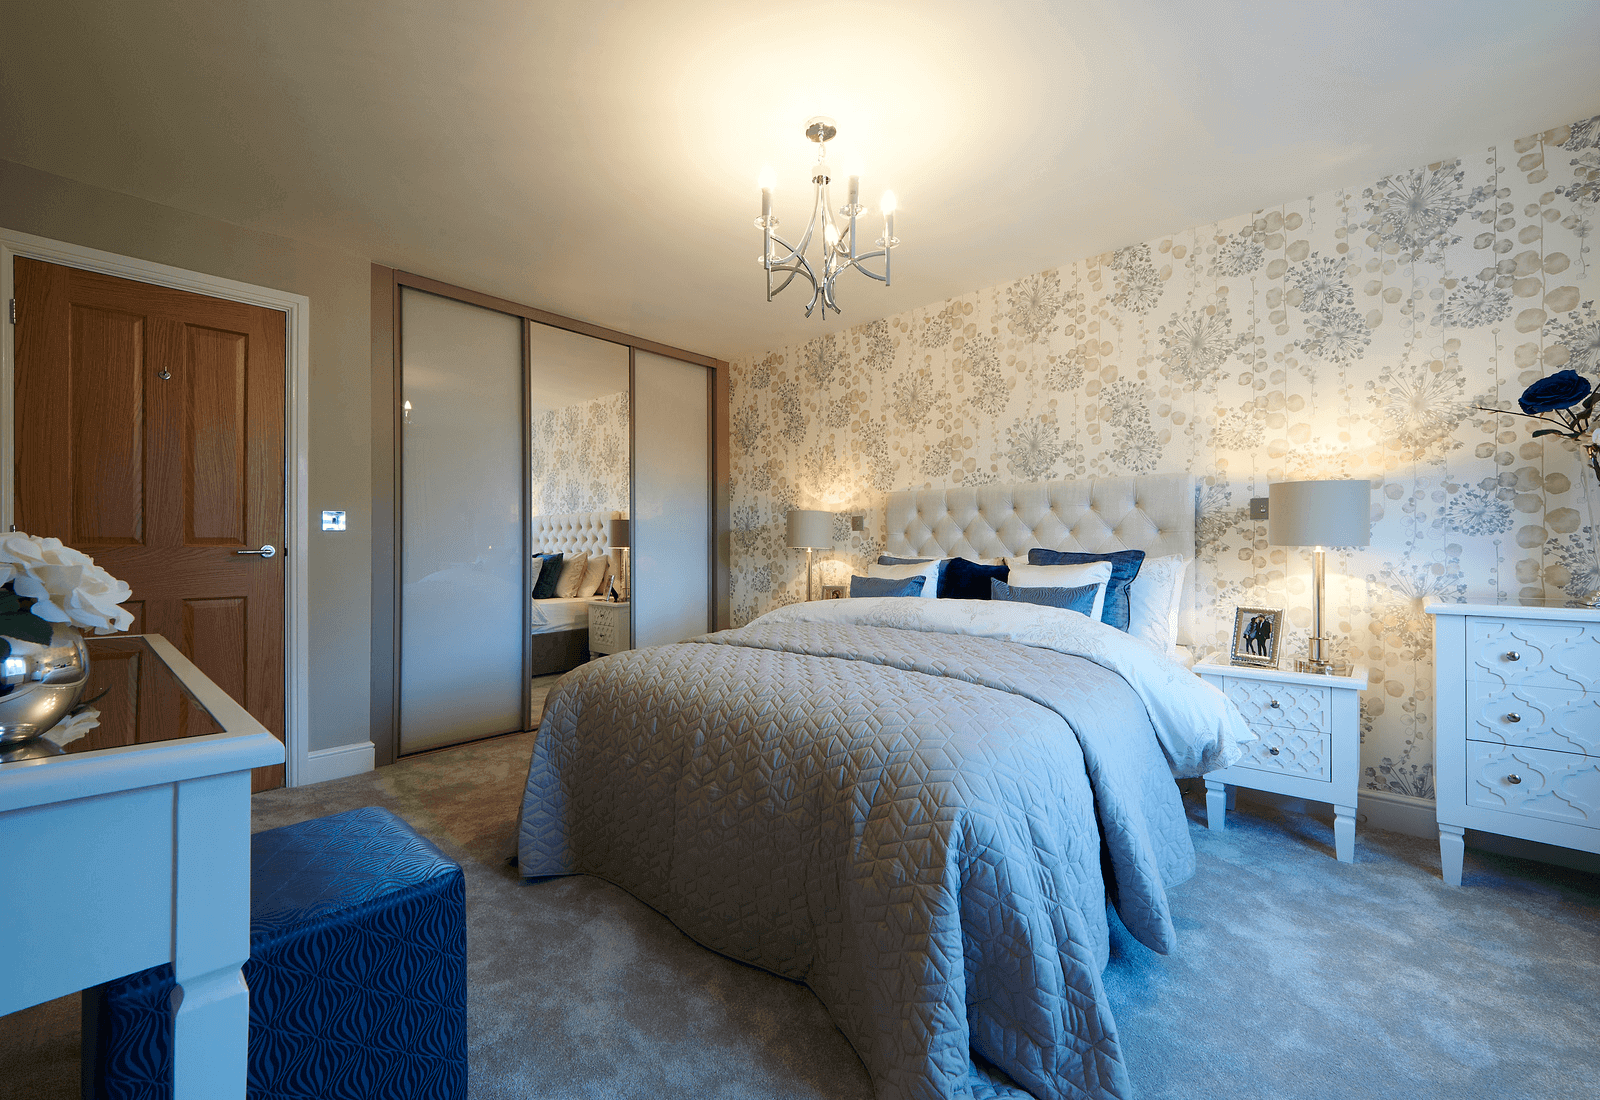 Master bedroom & En-suite in the Bayswater Show Home at St Peter's Park